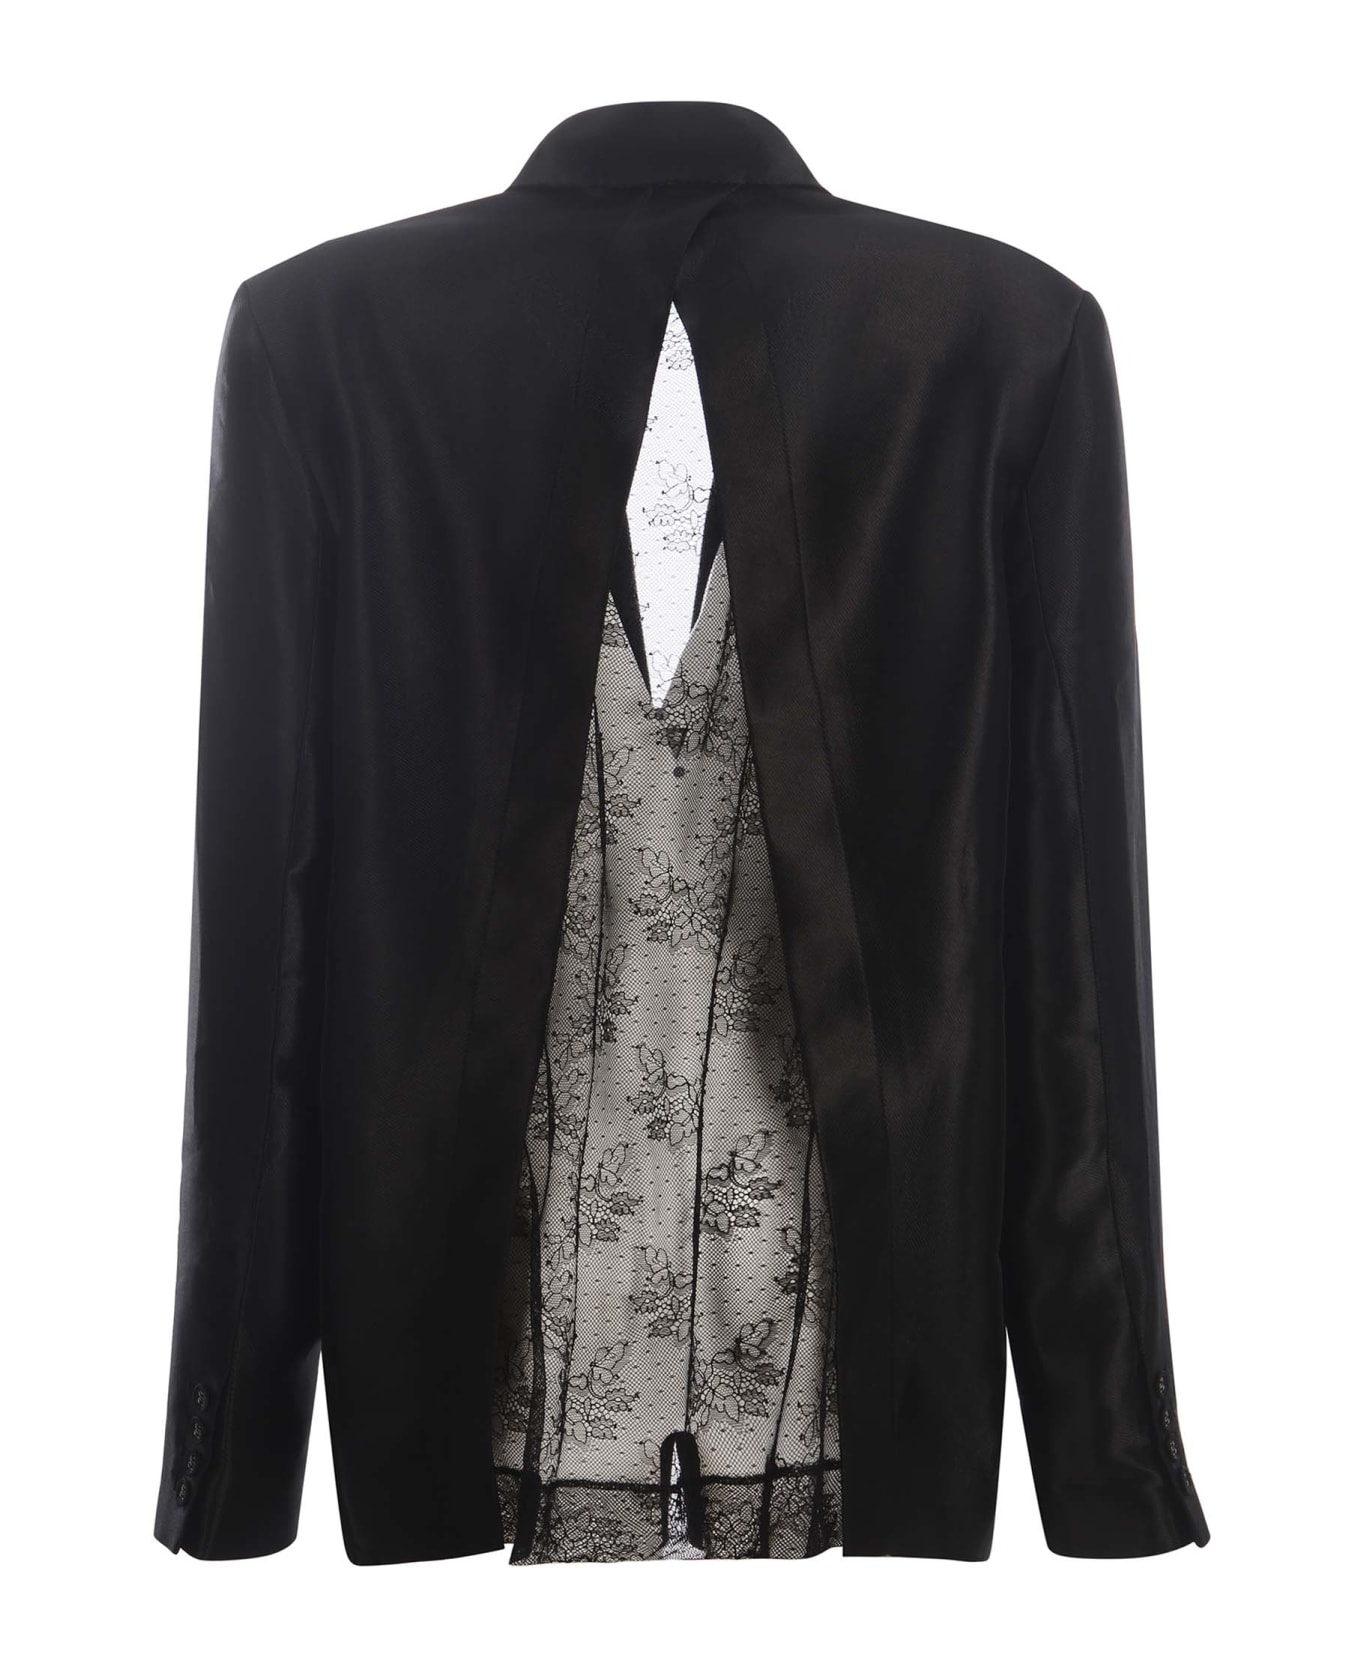 Rotate by Birger Christensen Jacket Rotate Made Of Viscose Blend - Nero